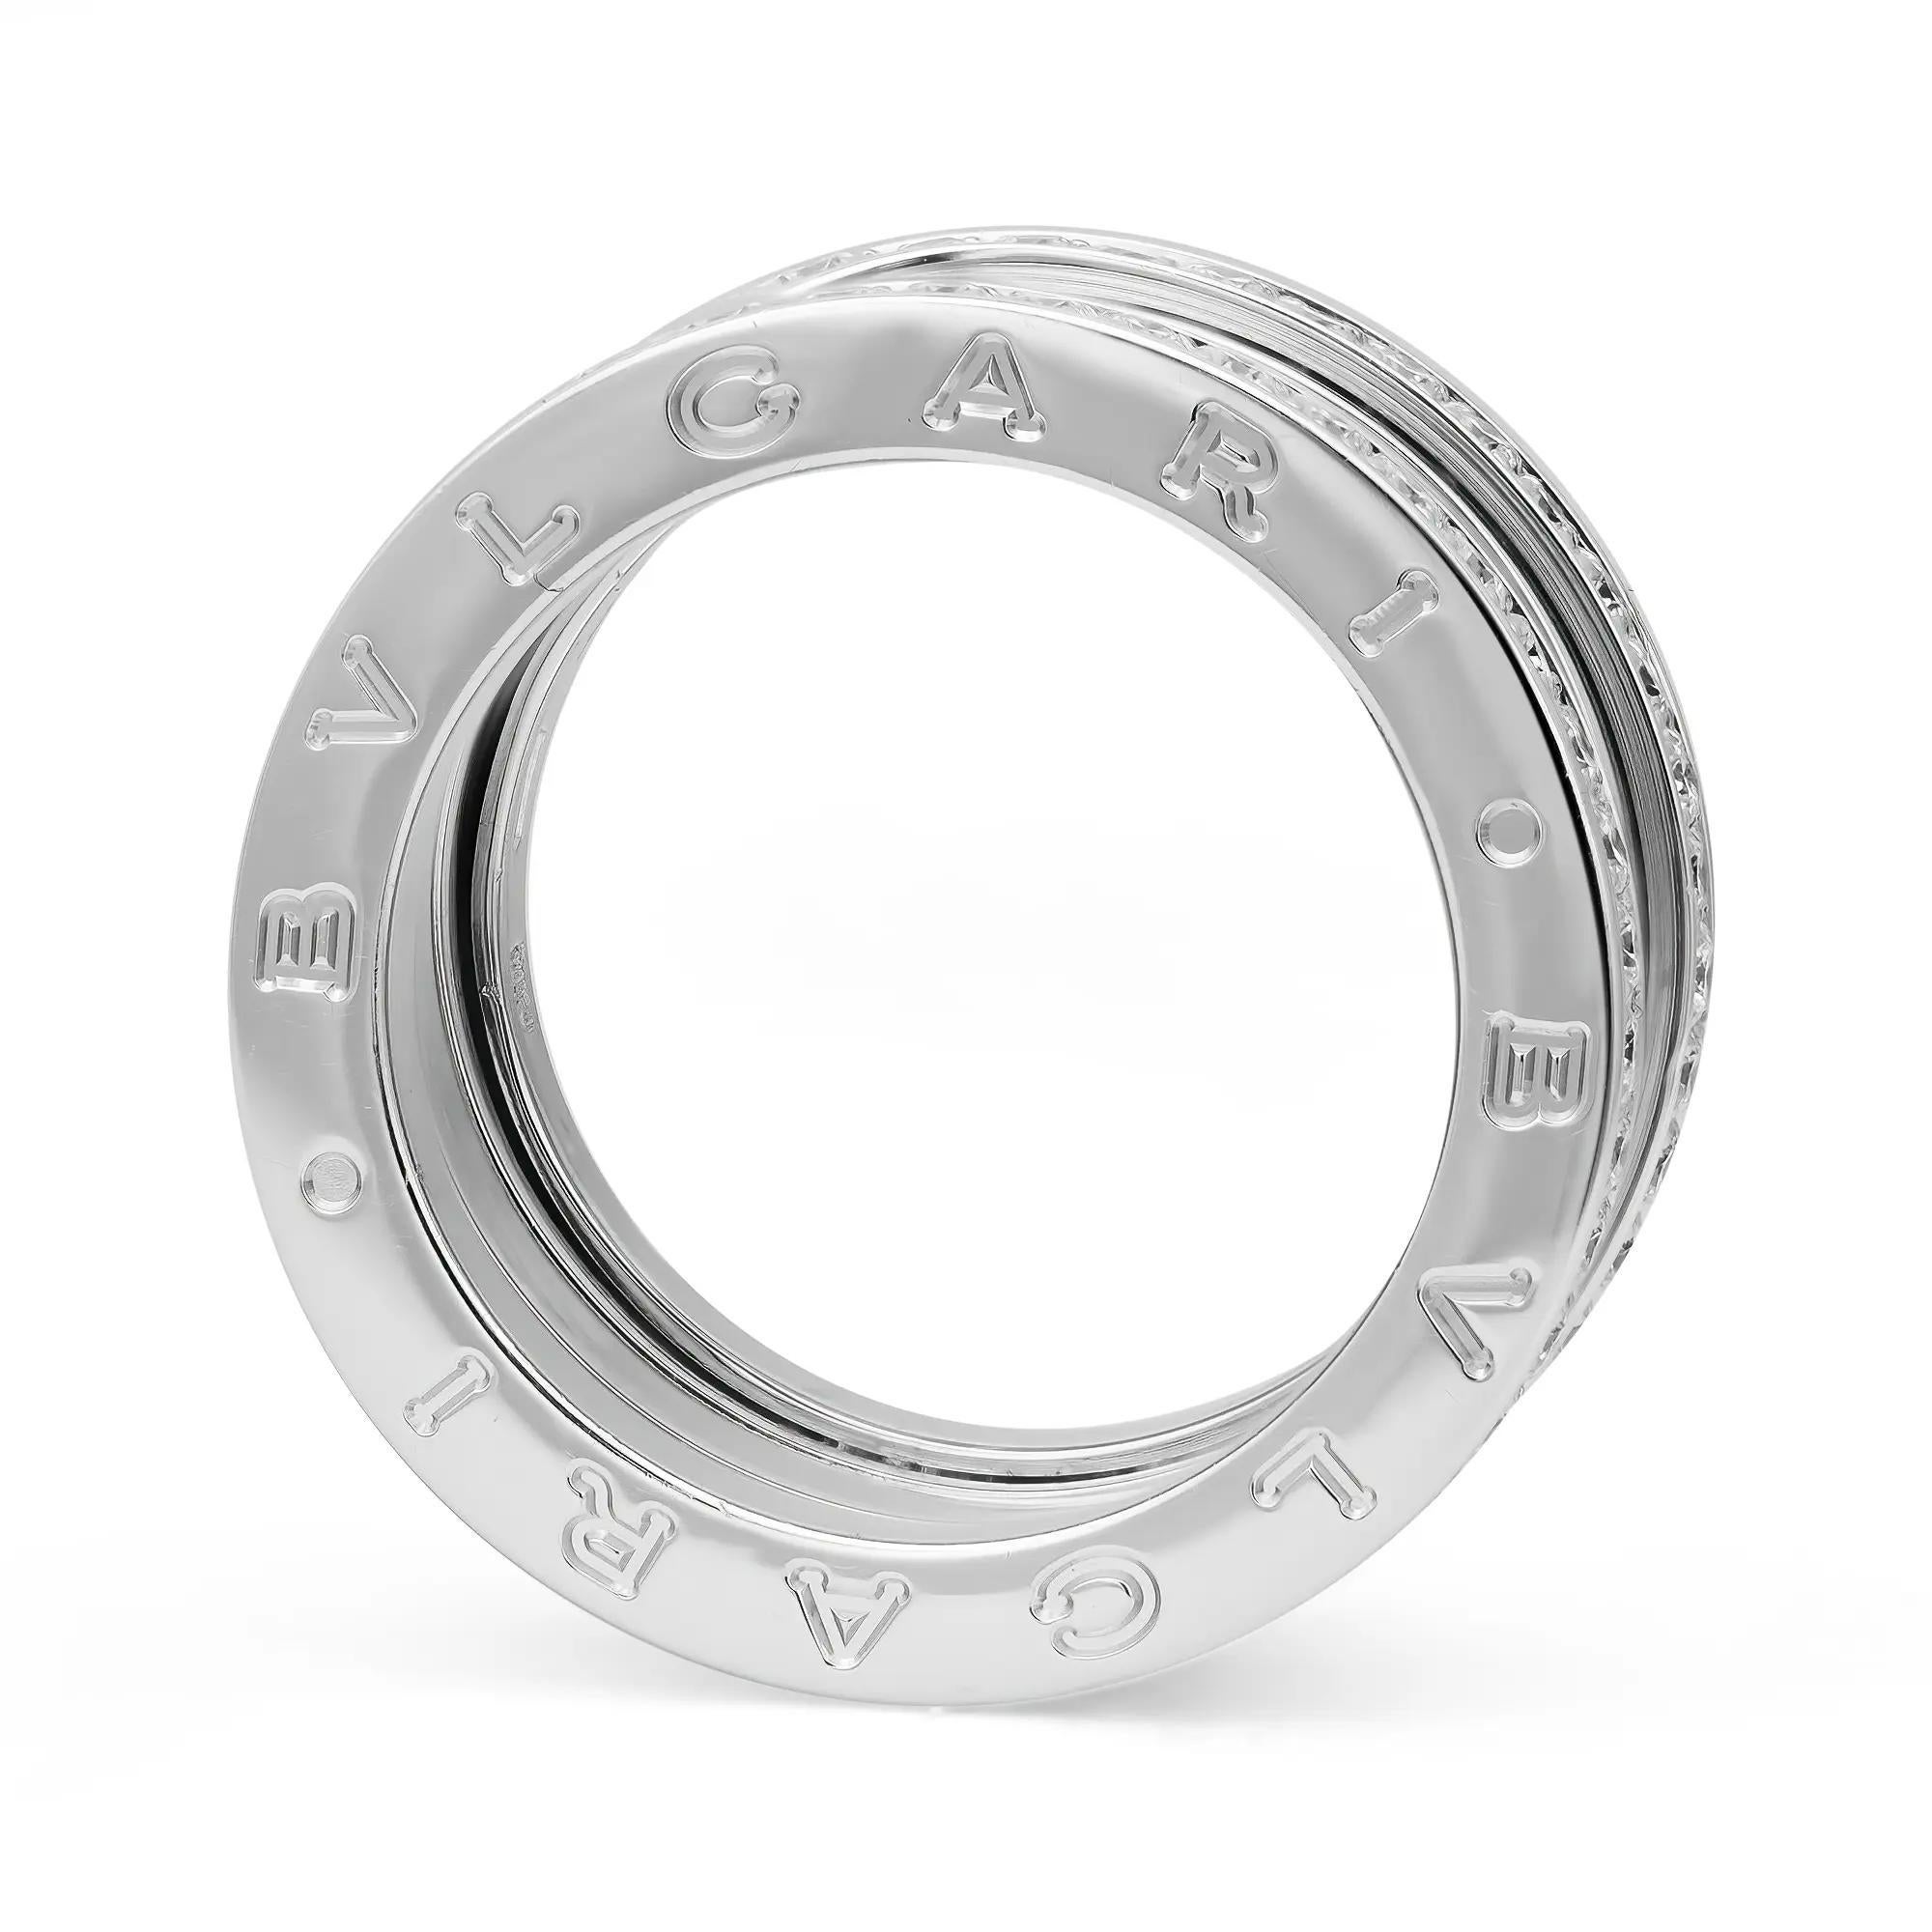 From the Bvlgari B.zero1 collection, this beautiful four-band ring is crafted in a lustrous 18K white gold. It features a distinctive four-band spiral ring with pavé set round brilliant cut diamonds on the rims with the BVLGARI logo engraved on both